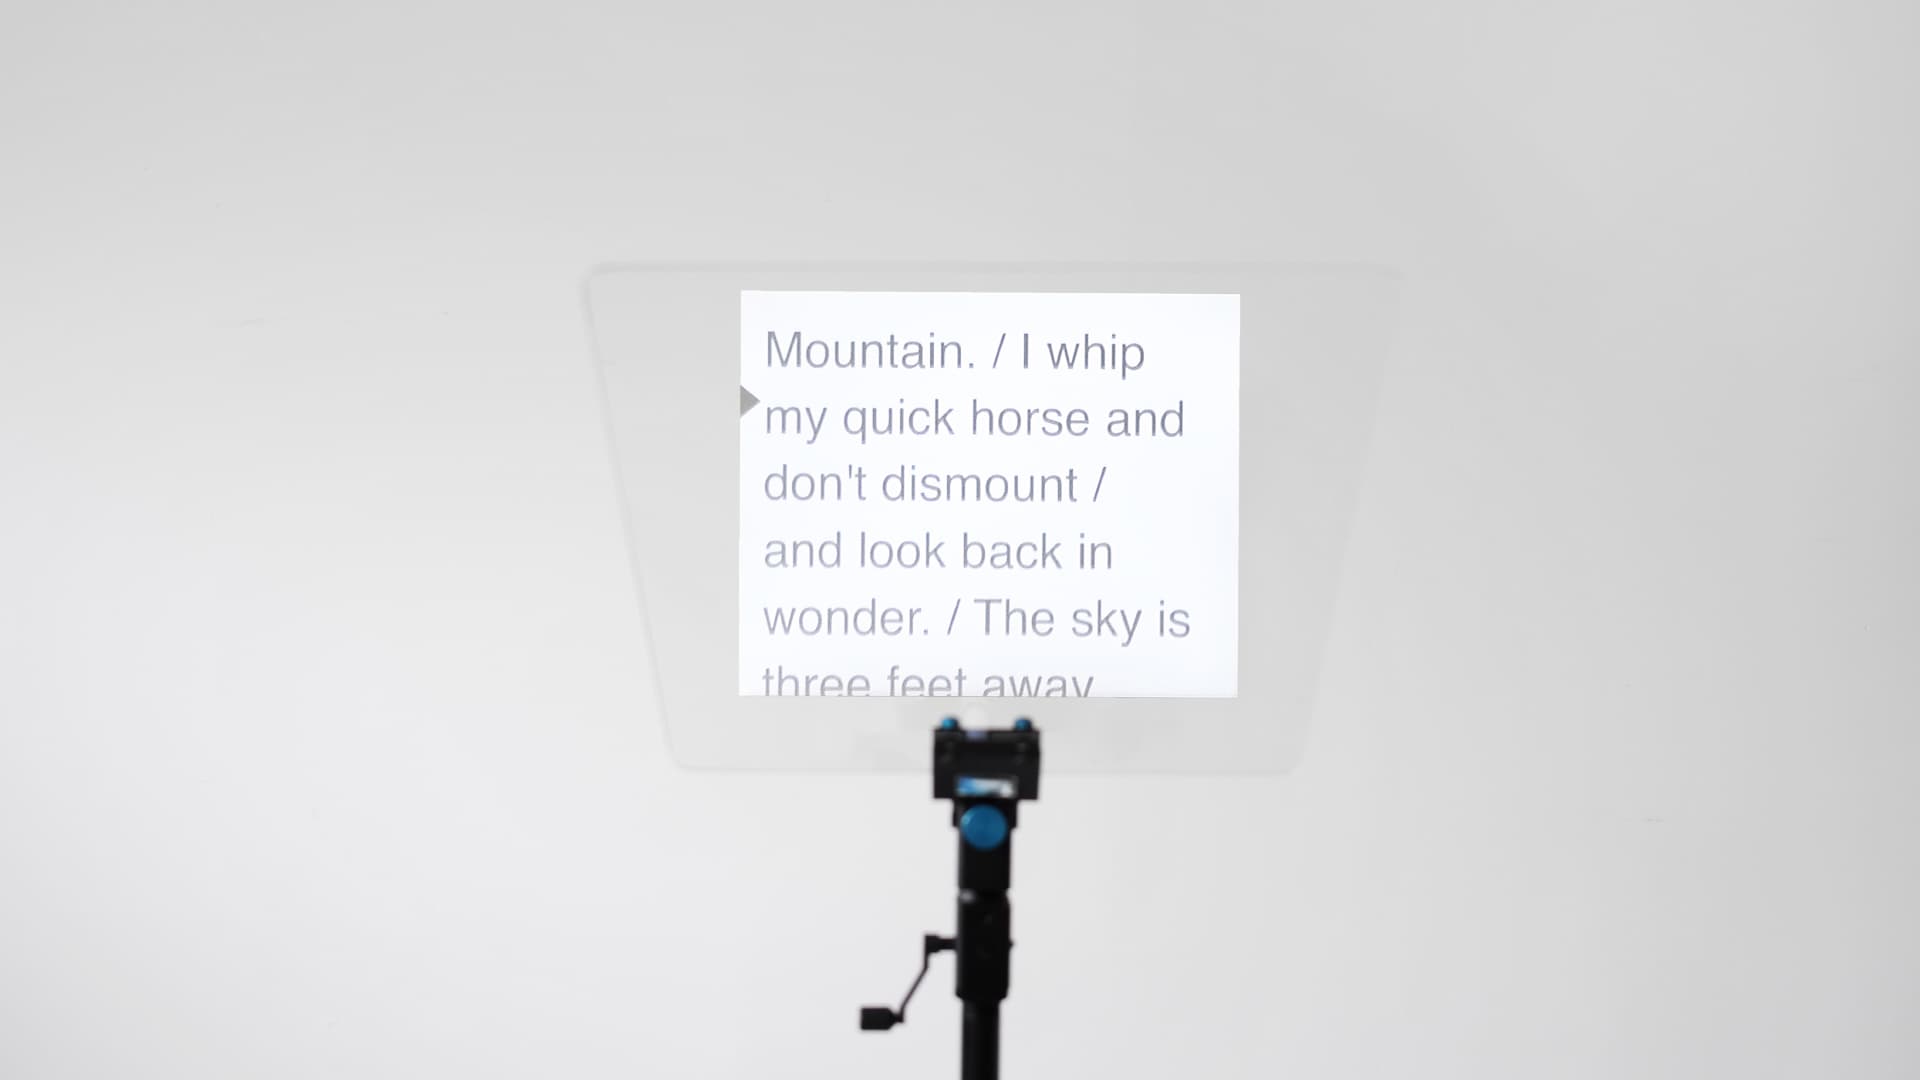 A close-up, front-on photograph of the teleprompter's glass panel. The image projected on to the screen is now visible, revealing large black sans-serif text that reads: 'Mountain./I whip my quick horse and do not dismount / and look back in wonder. / The sky is three feet away.'